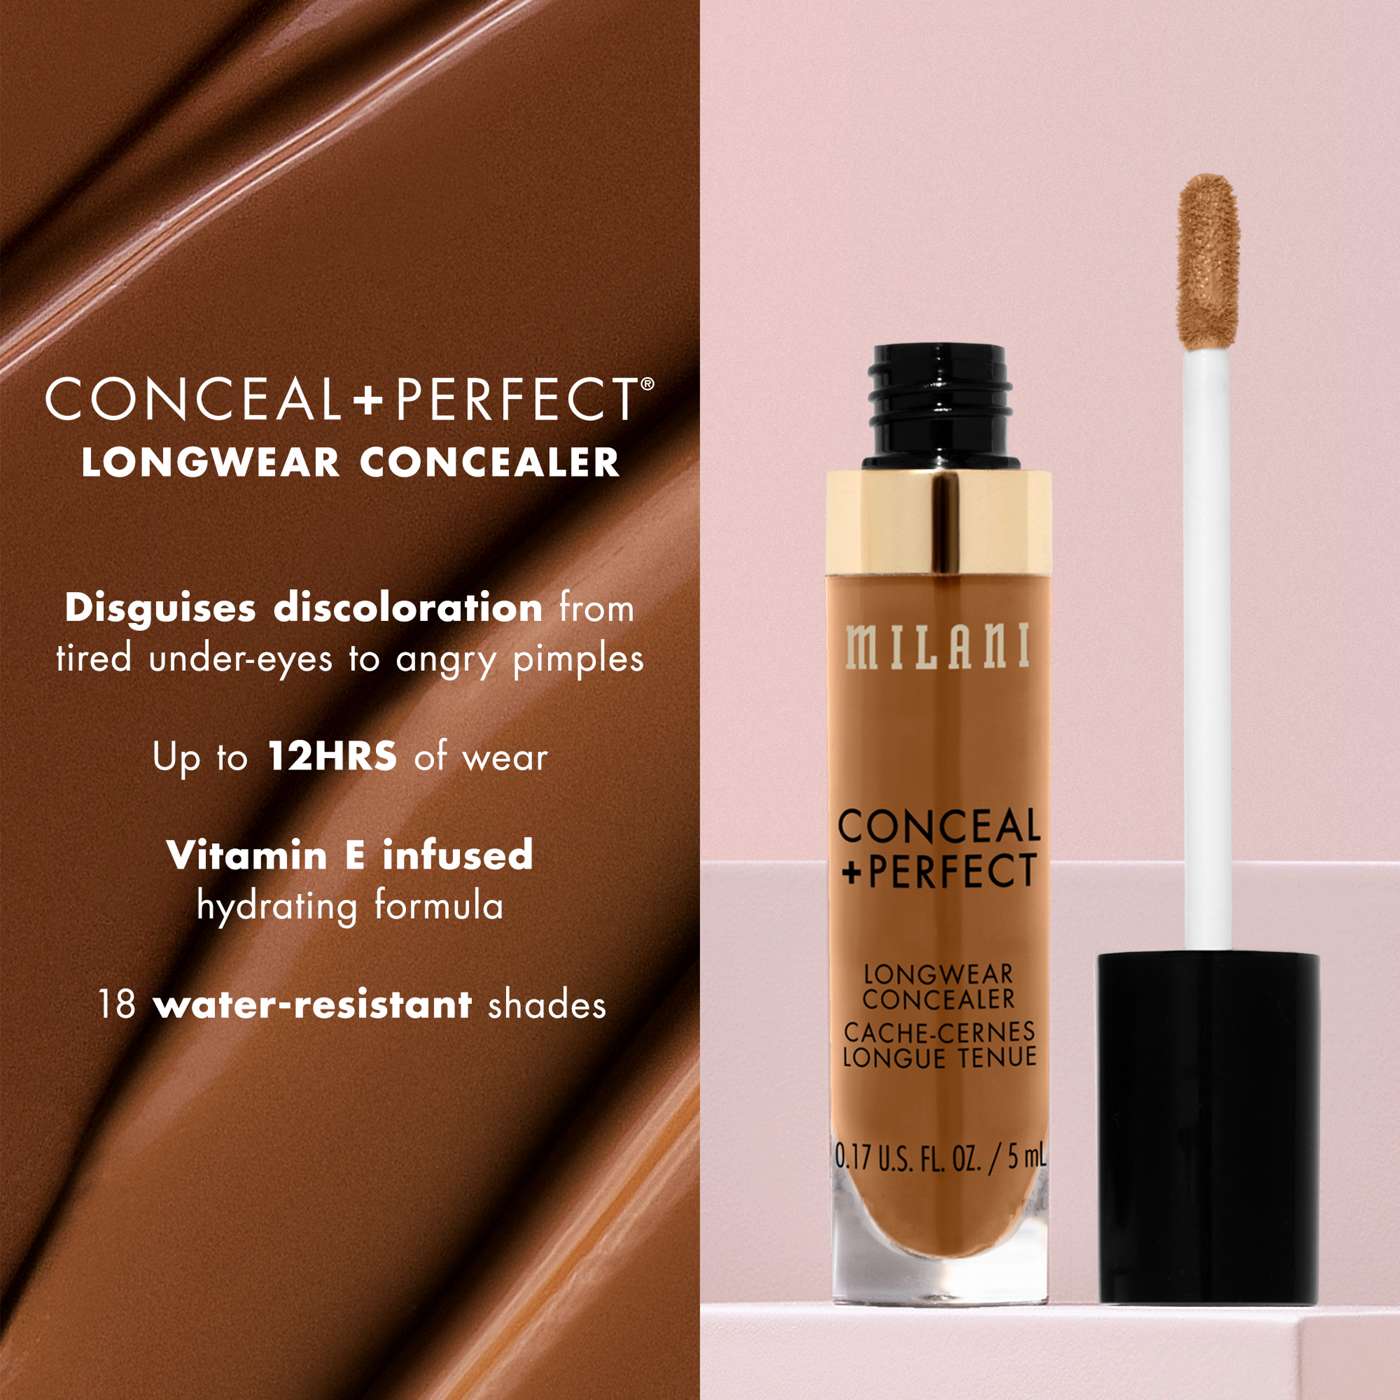 Milani Conceal +Perfect Longwear Concealer - Warm Almond; image 7 of 7